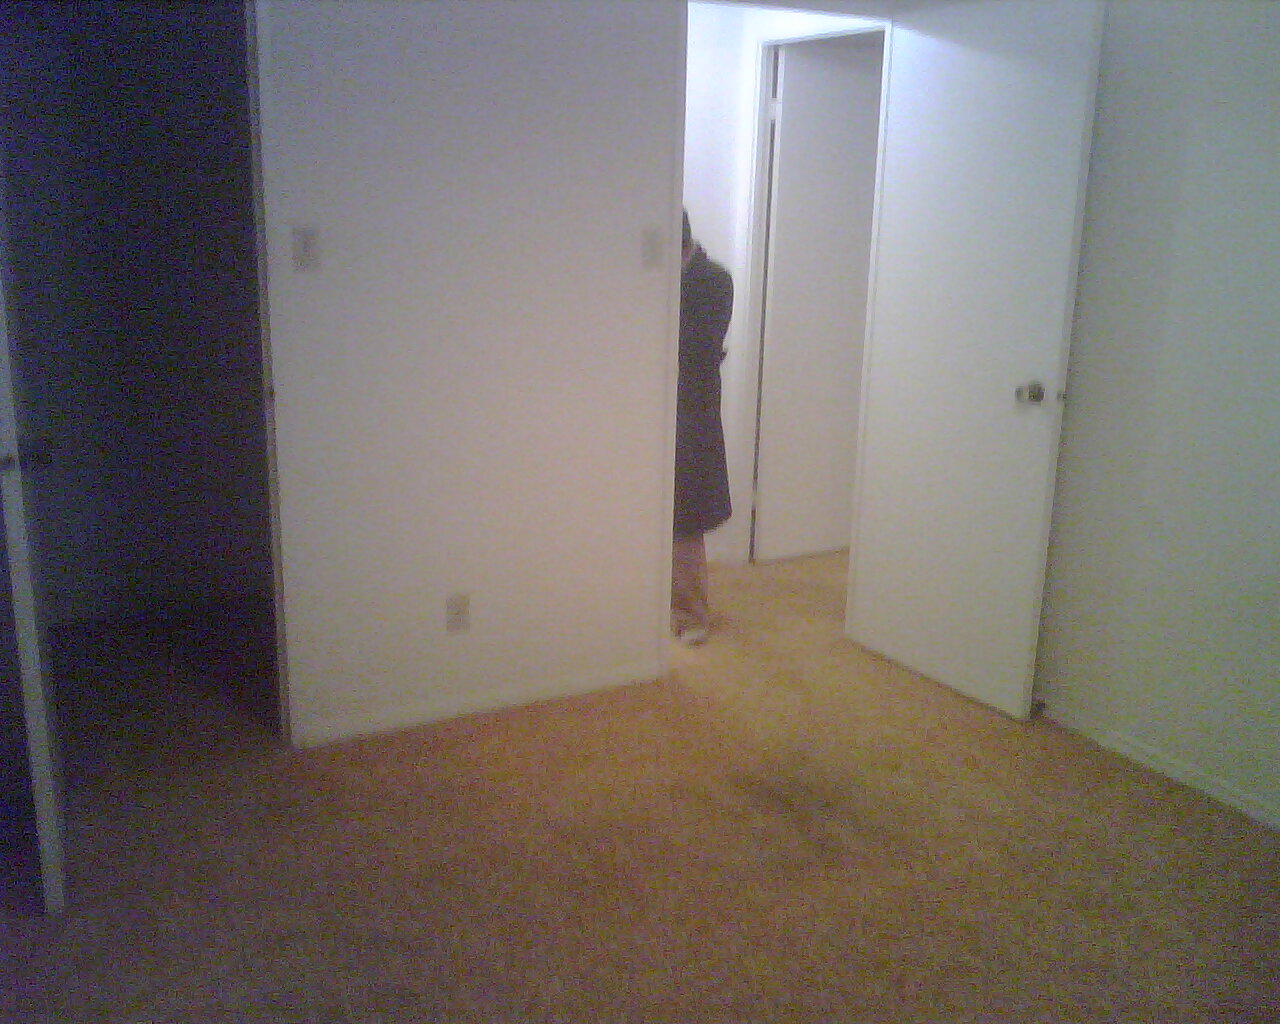 Upstairs (2nd Floor) bedroom 3's front end as seen from the room's corner